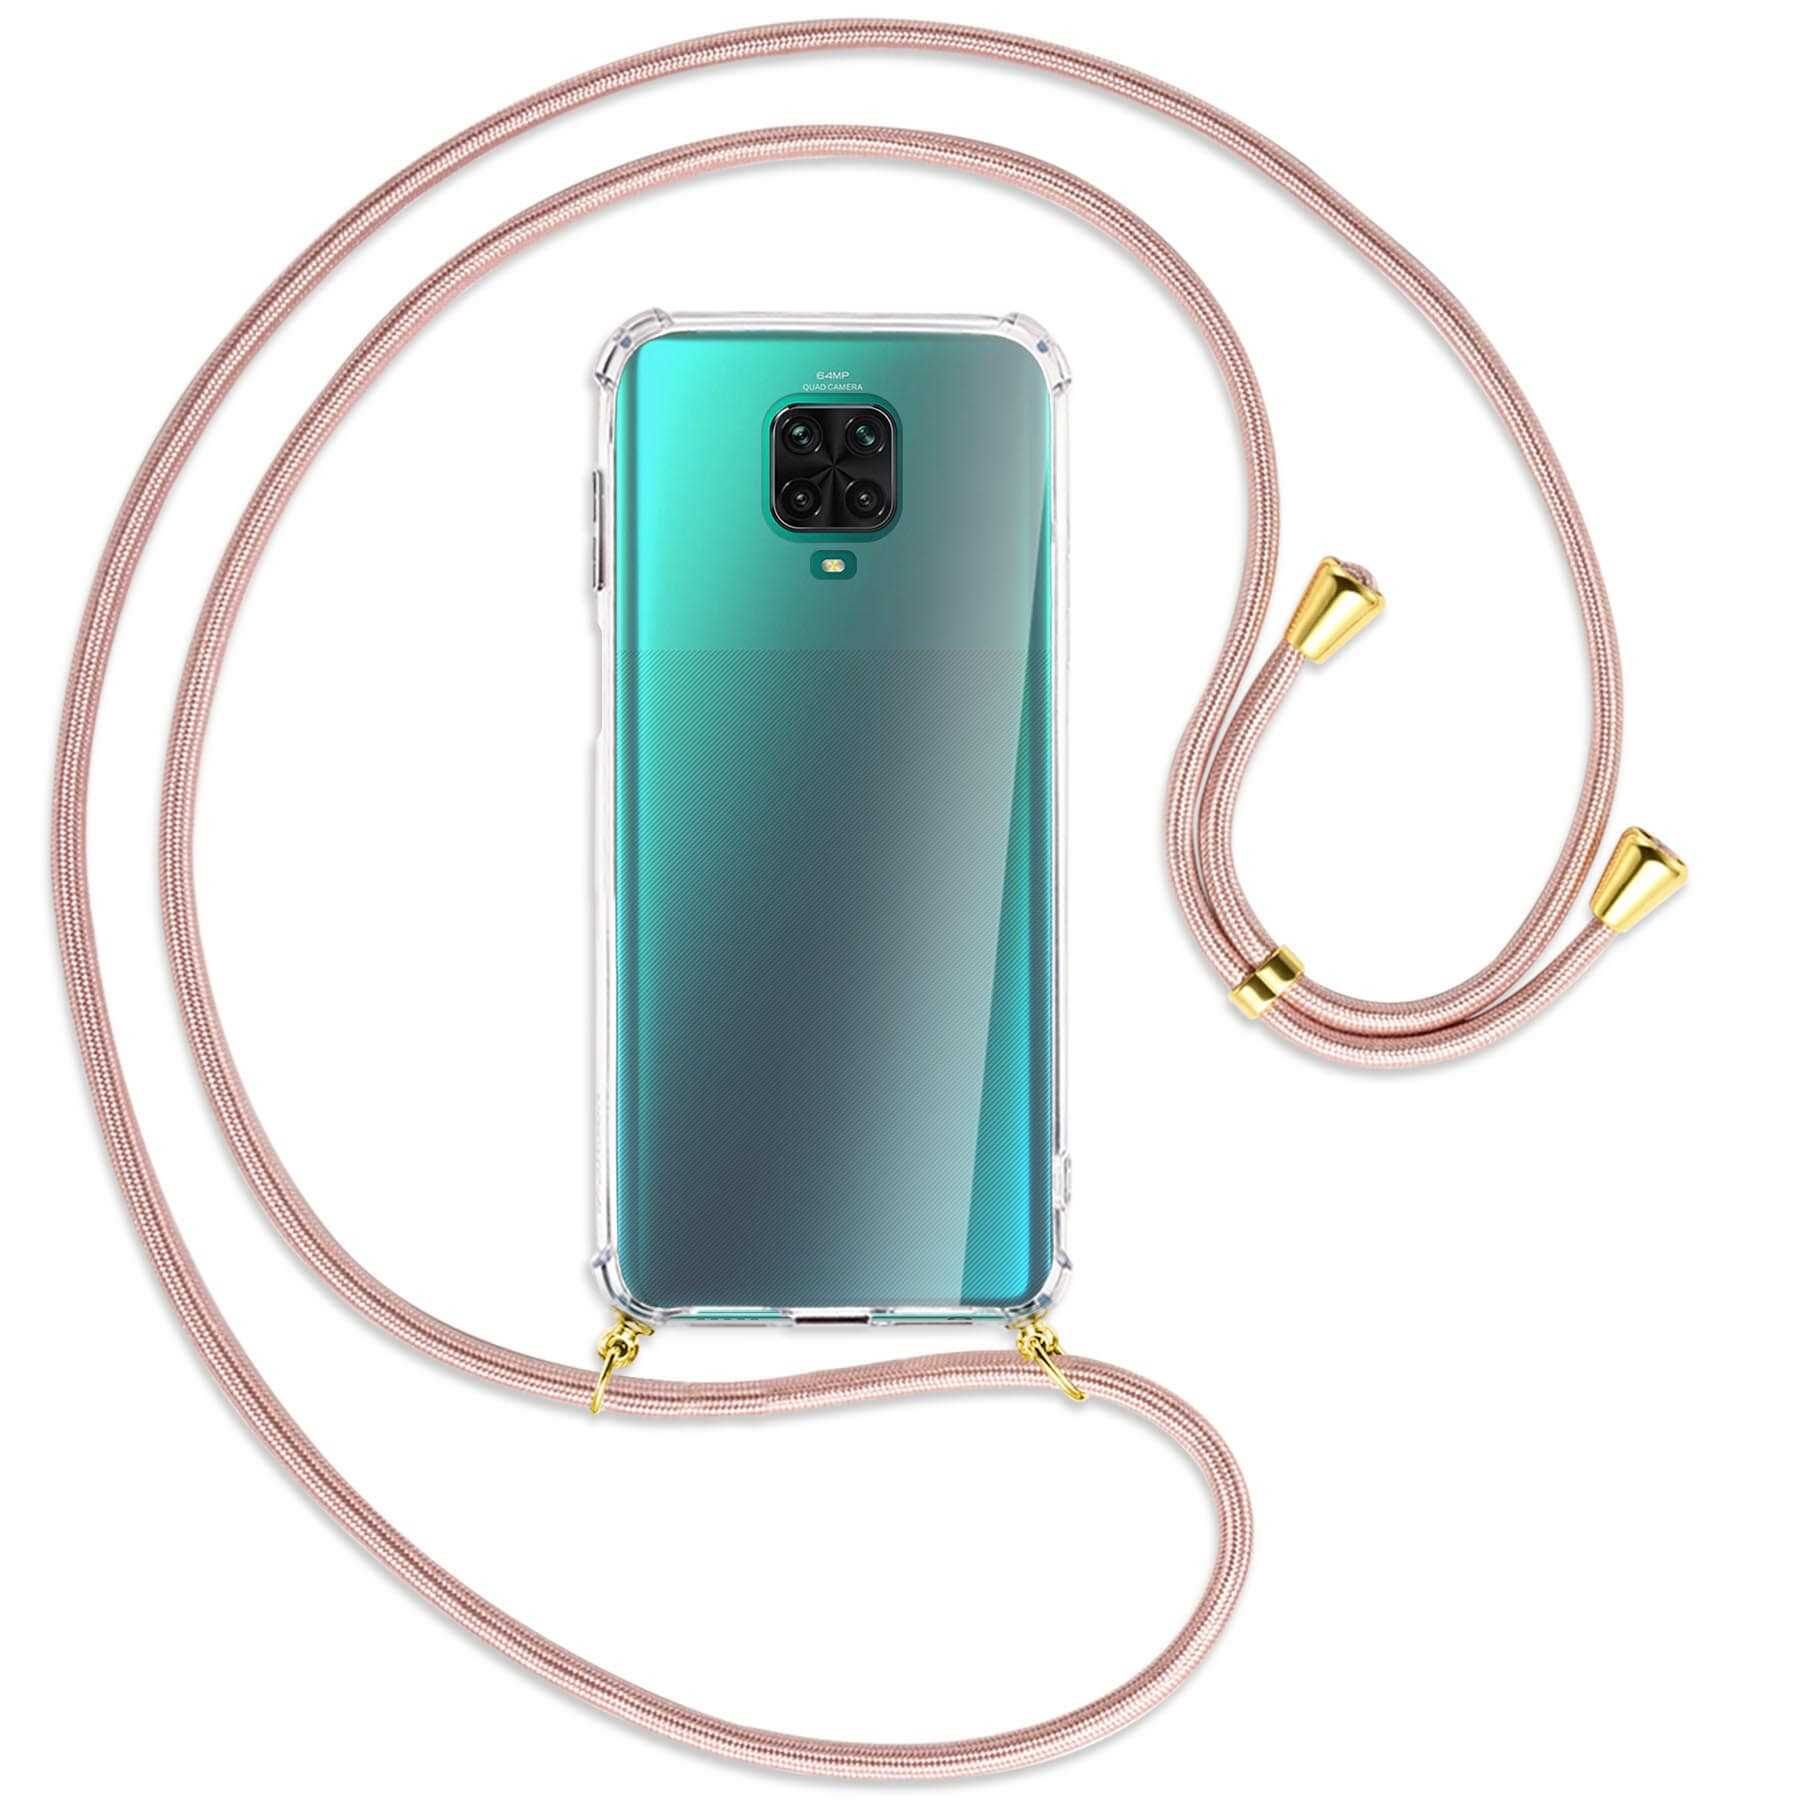 MTB MORE Pro, Umhänge-Hülle / Note Xiaomi, Redmi Rosegold Kordel, Gold mit ENERGY Redmi 9 Note Backcover, 9S